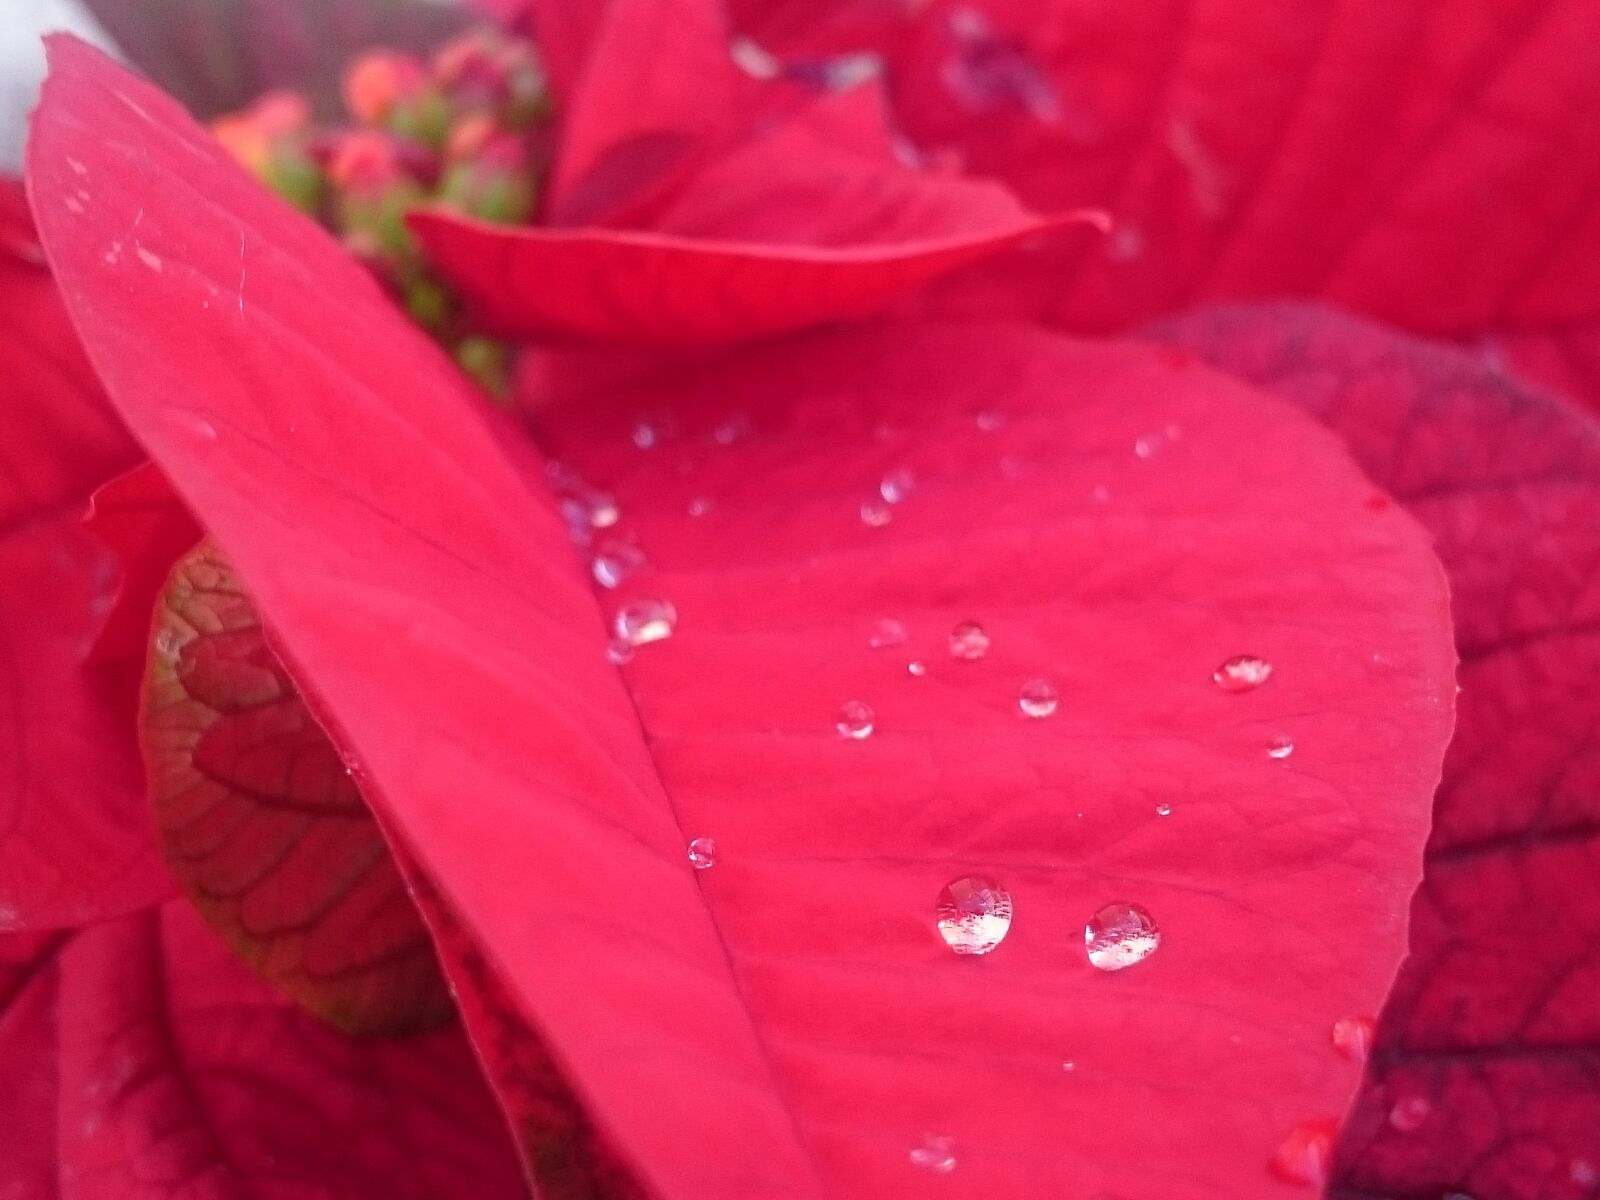 Sony Xperia Z3 Compact sample photo. Raindrop, drop, water photography